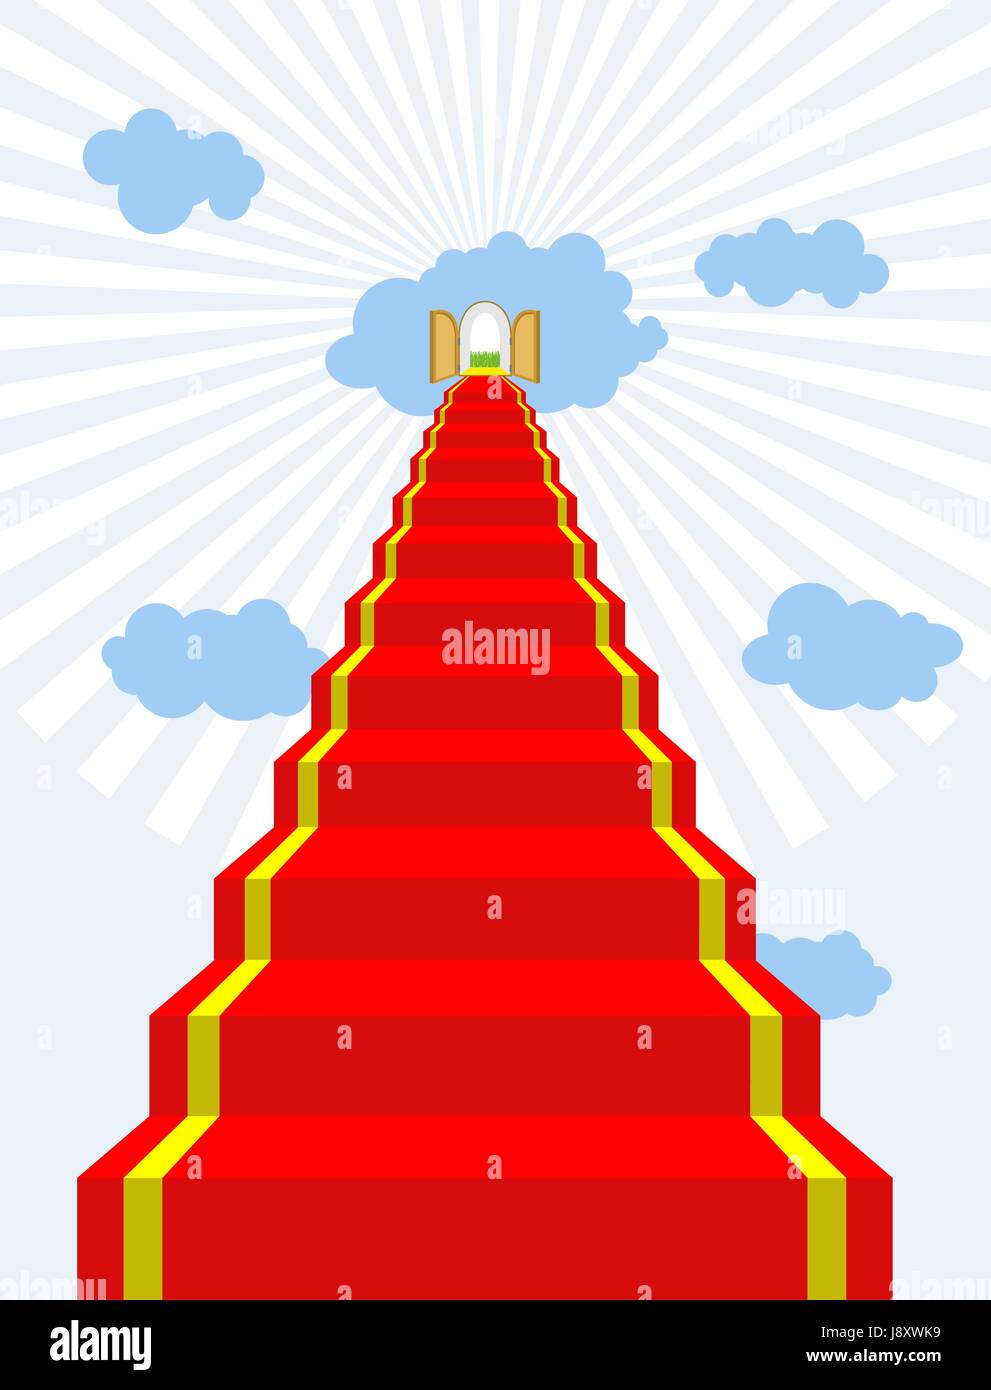 Stairway to paradise. Red carpet into sky. Gates of paradise. Doors in  clouds. Vector illustration of Gods dwelling. Climb to top of heaven. Stock Vector